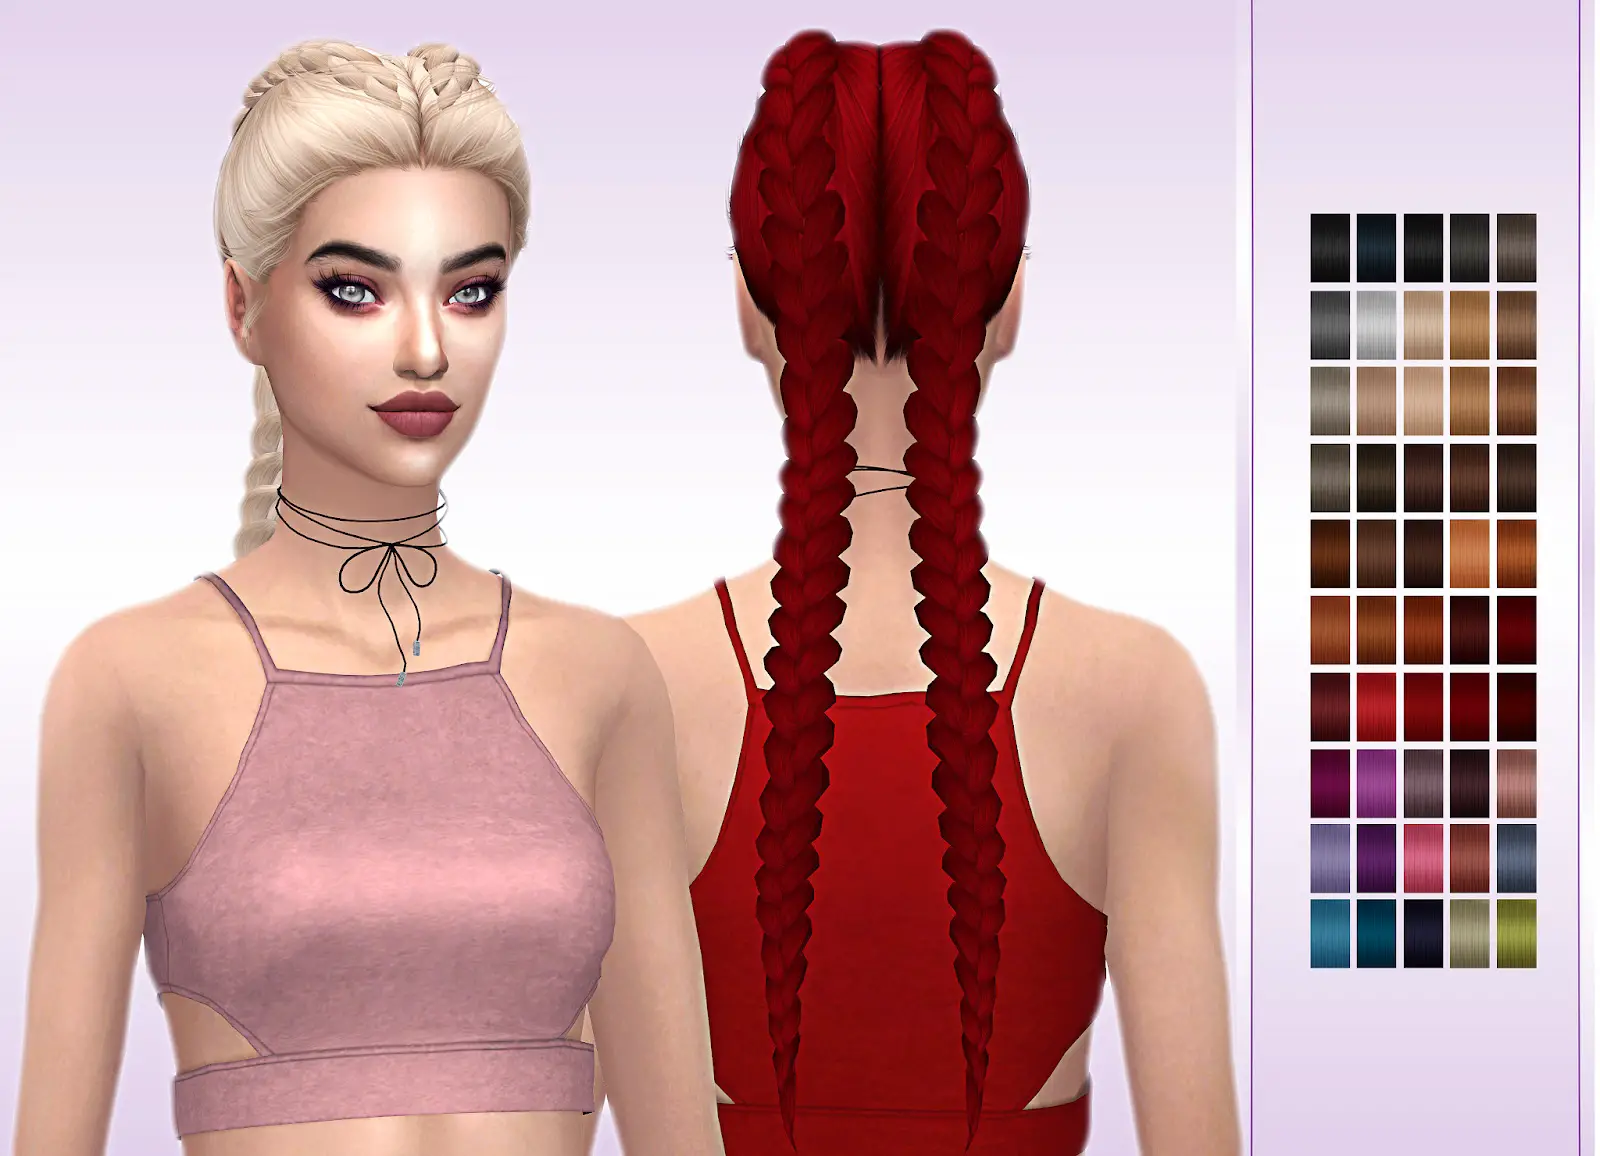 Sims 4 Hairs ~ Frost Sims 4: Simpliciaty`s Reyah hair retextured
